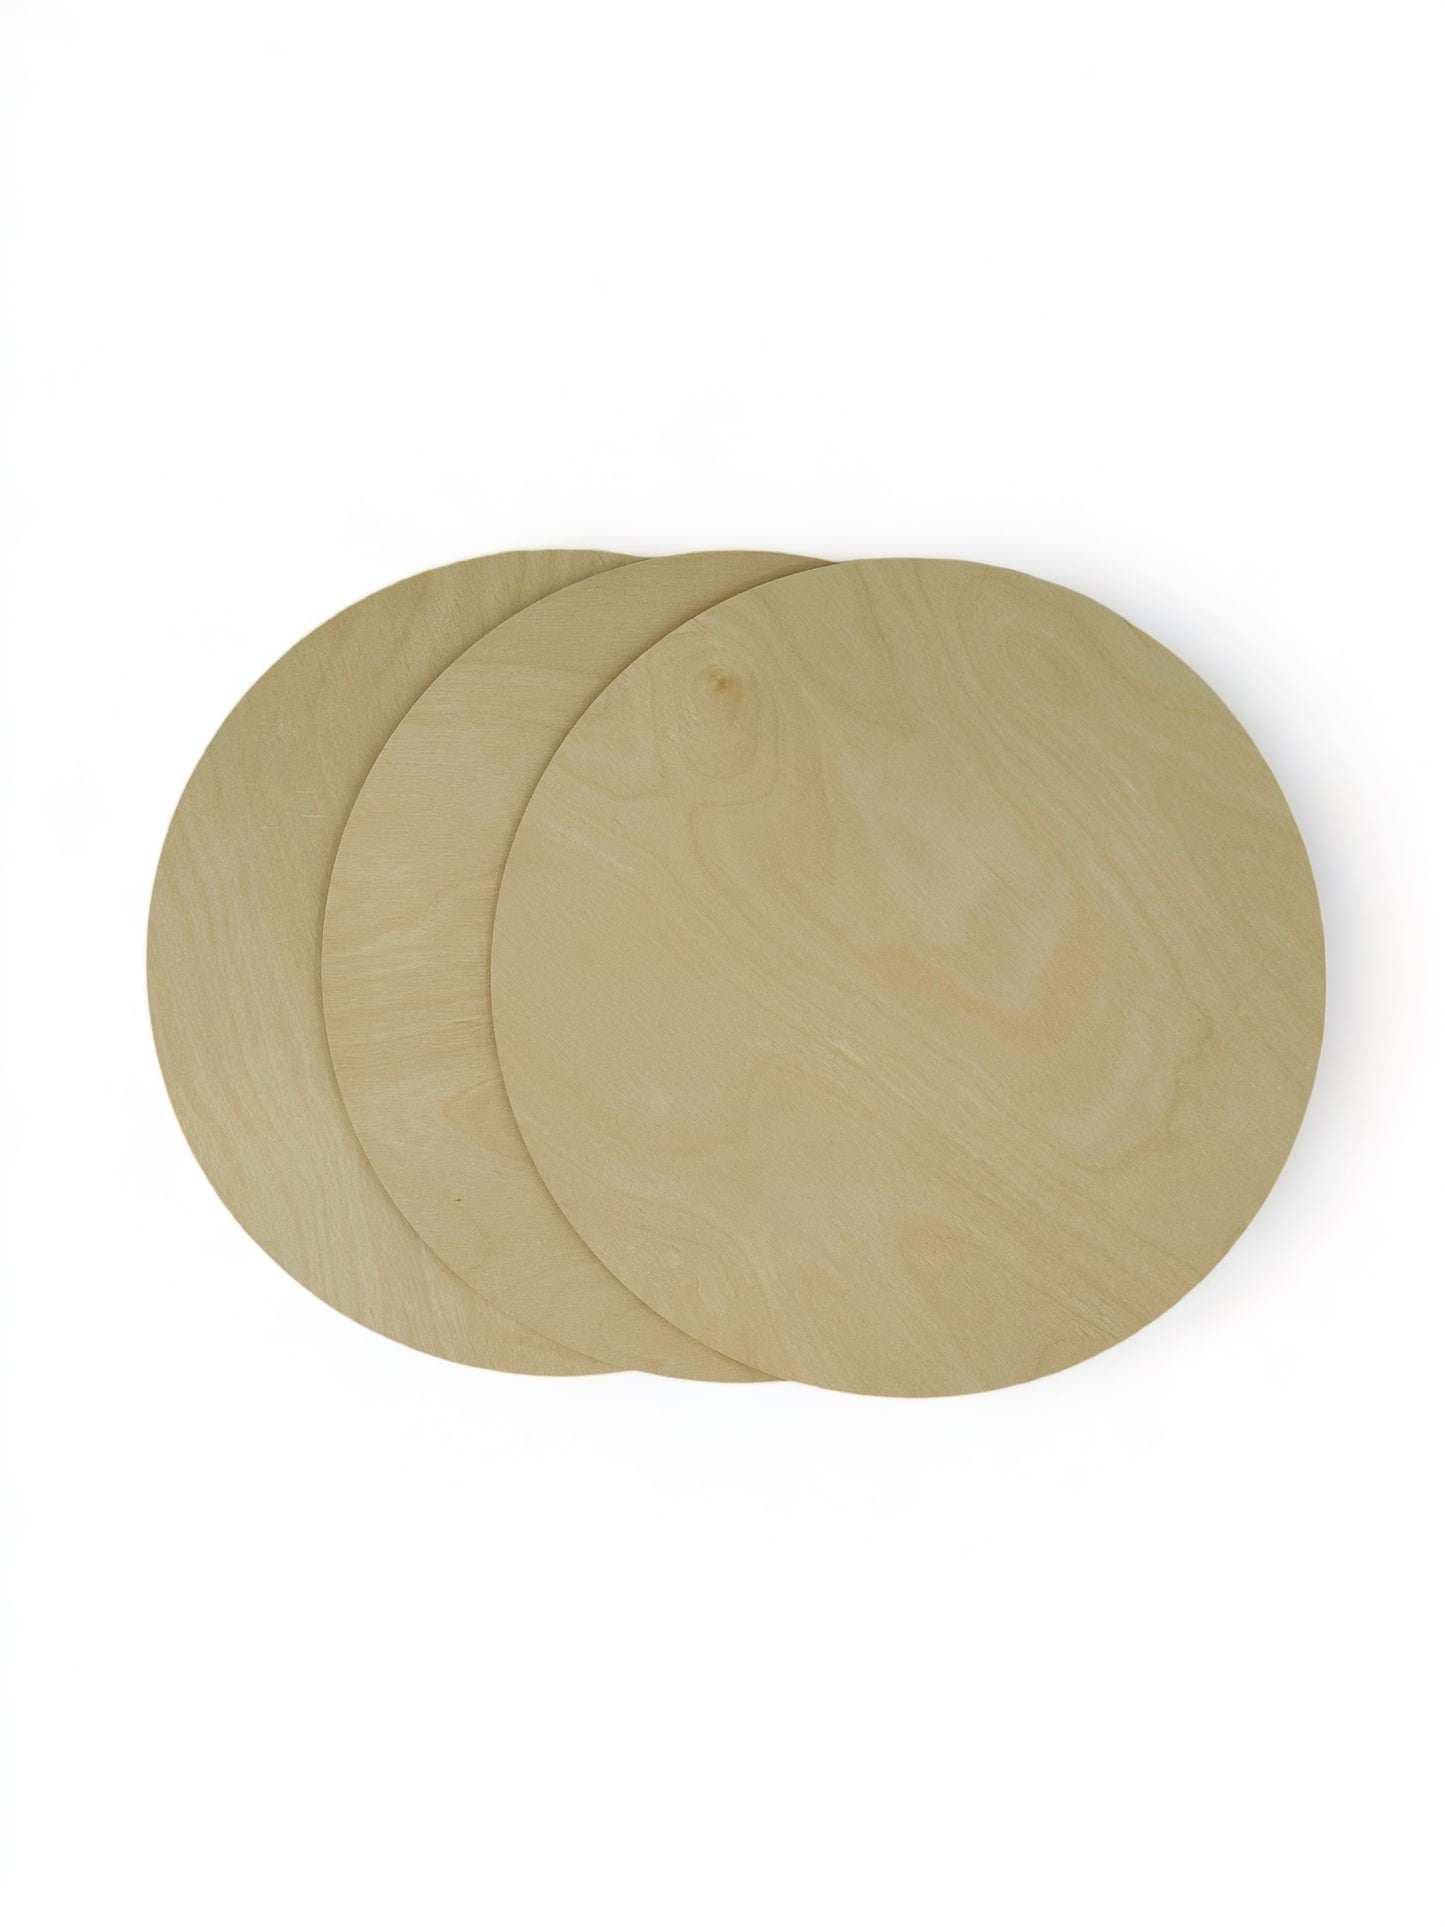 12 Pack - 15 inch Birch Wooden Crafting Round Cutouts - 1/4 inch